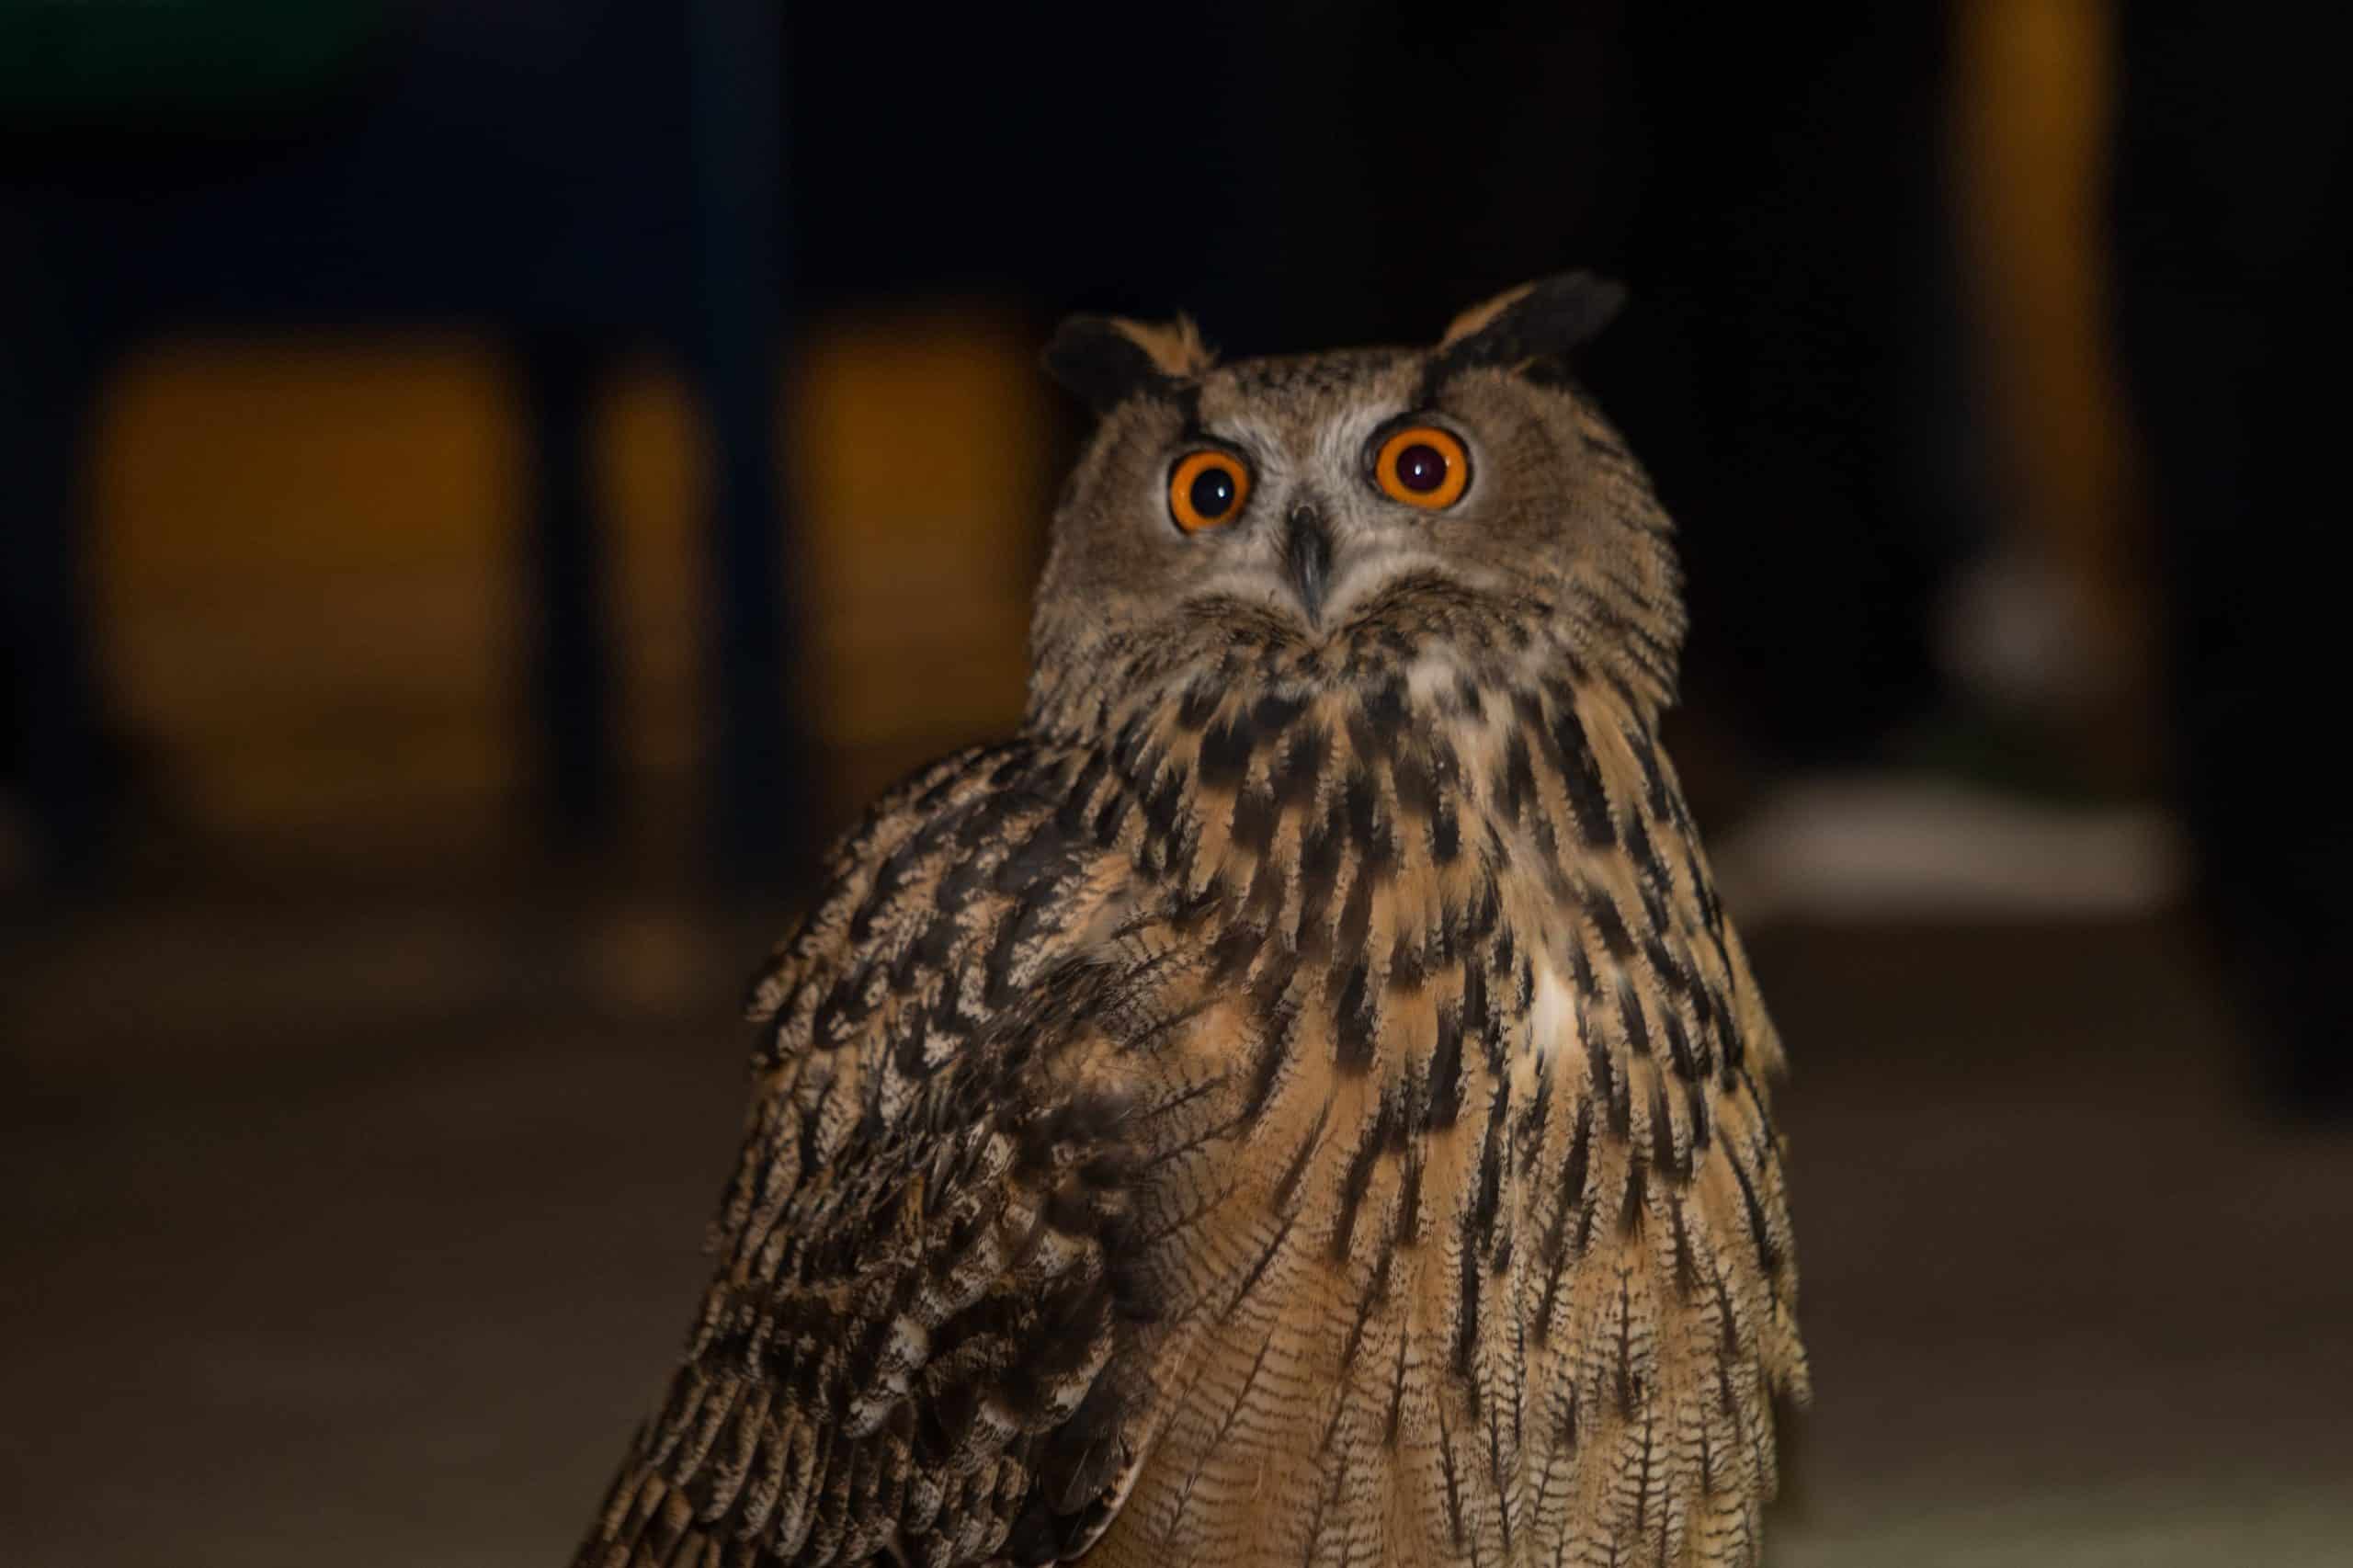 Flaco, a large Eurasian eagle owl escaped from the Central Park Zoo on February 2nd | NYC Mayor's Office